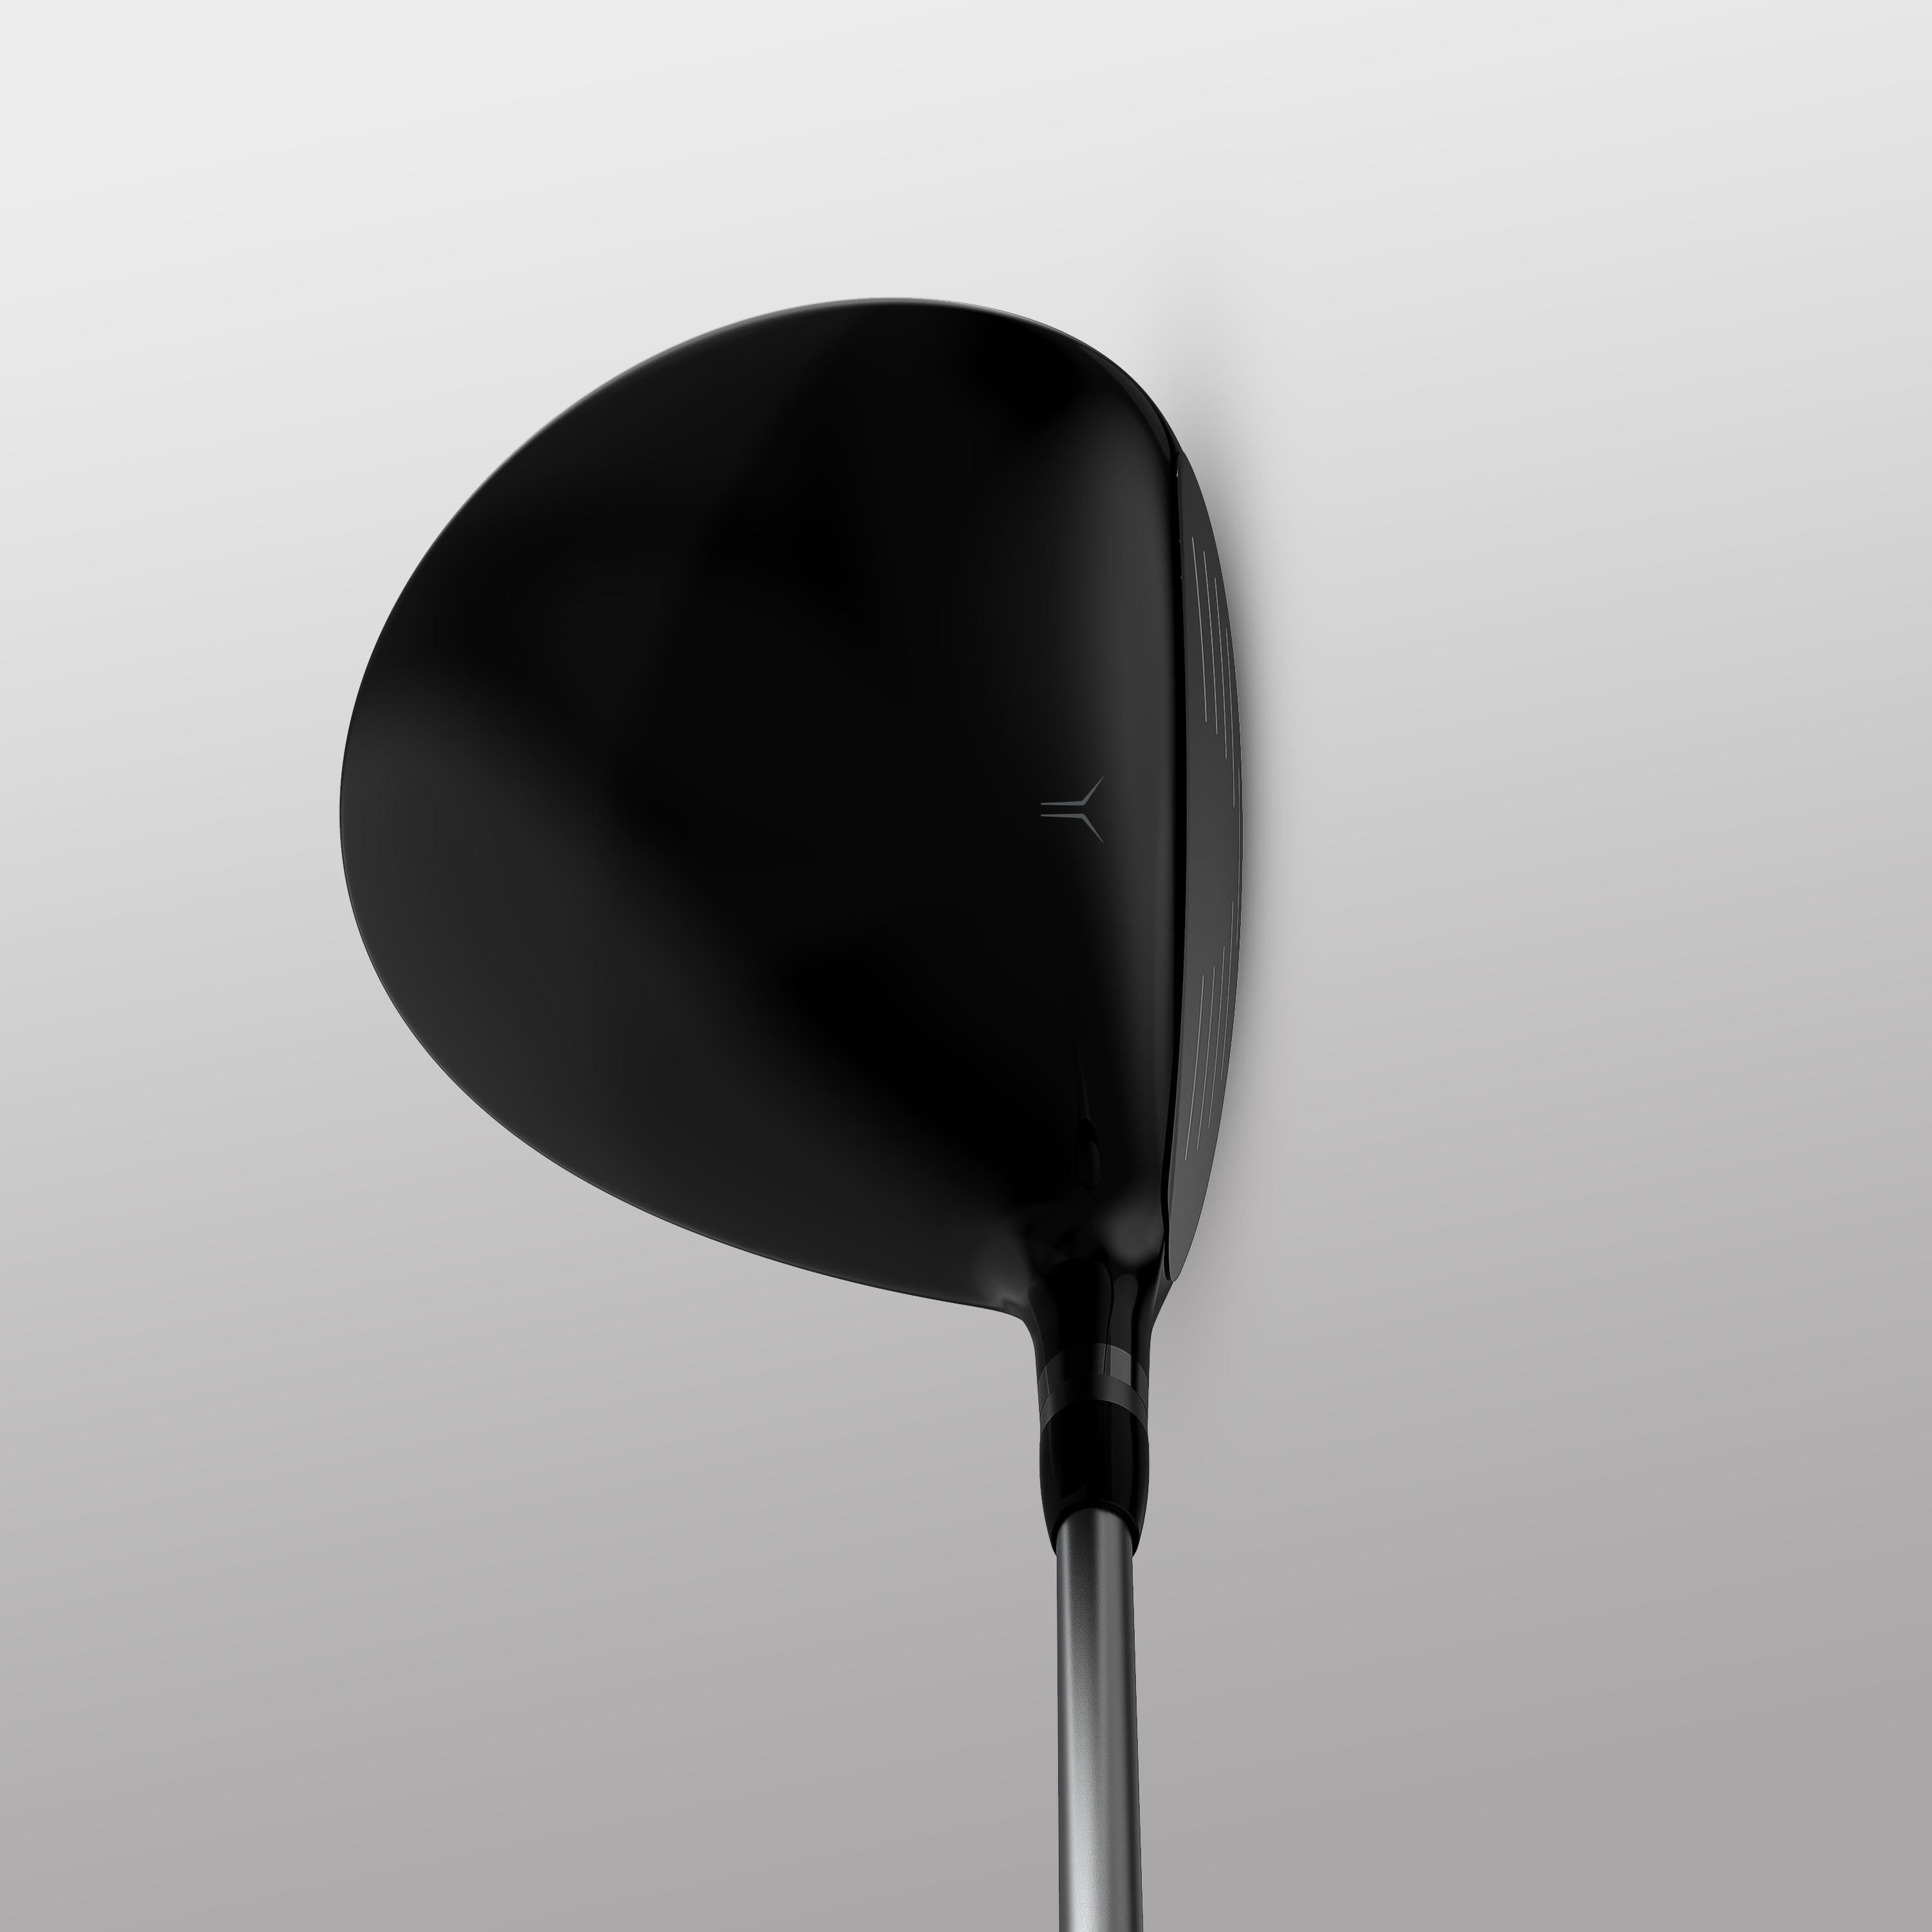 GOLF DRIVER 500 LEFT HANDED SIZE 2 & HIGH SPEED 2/8